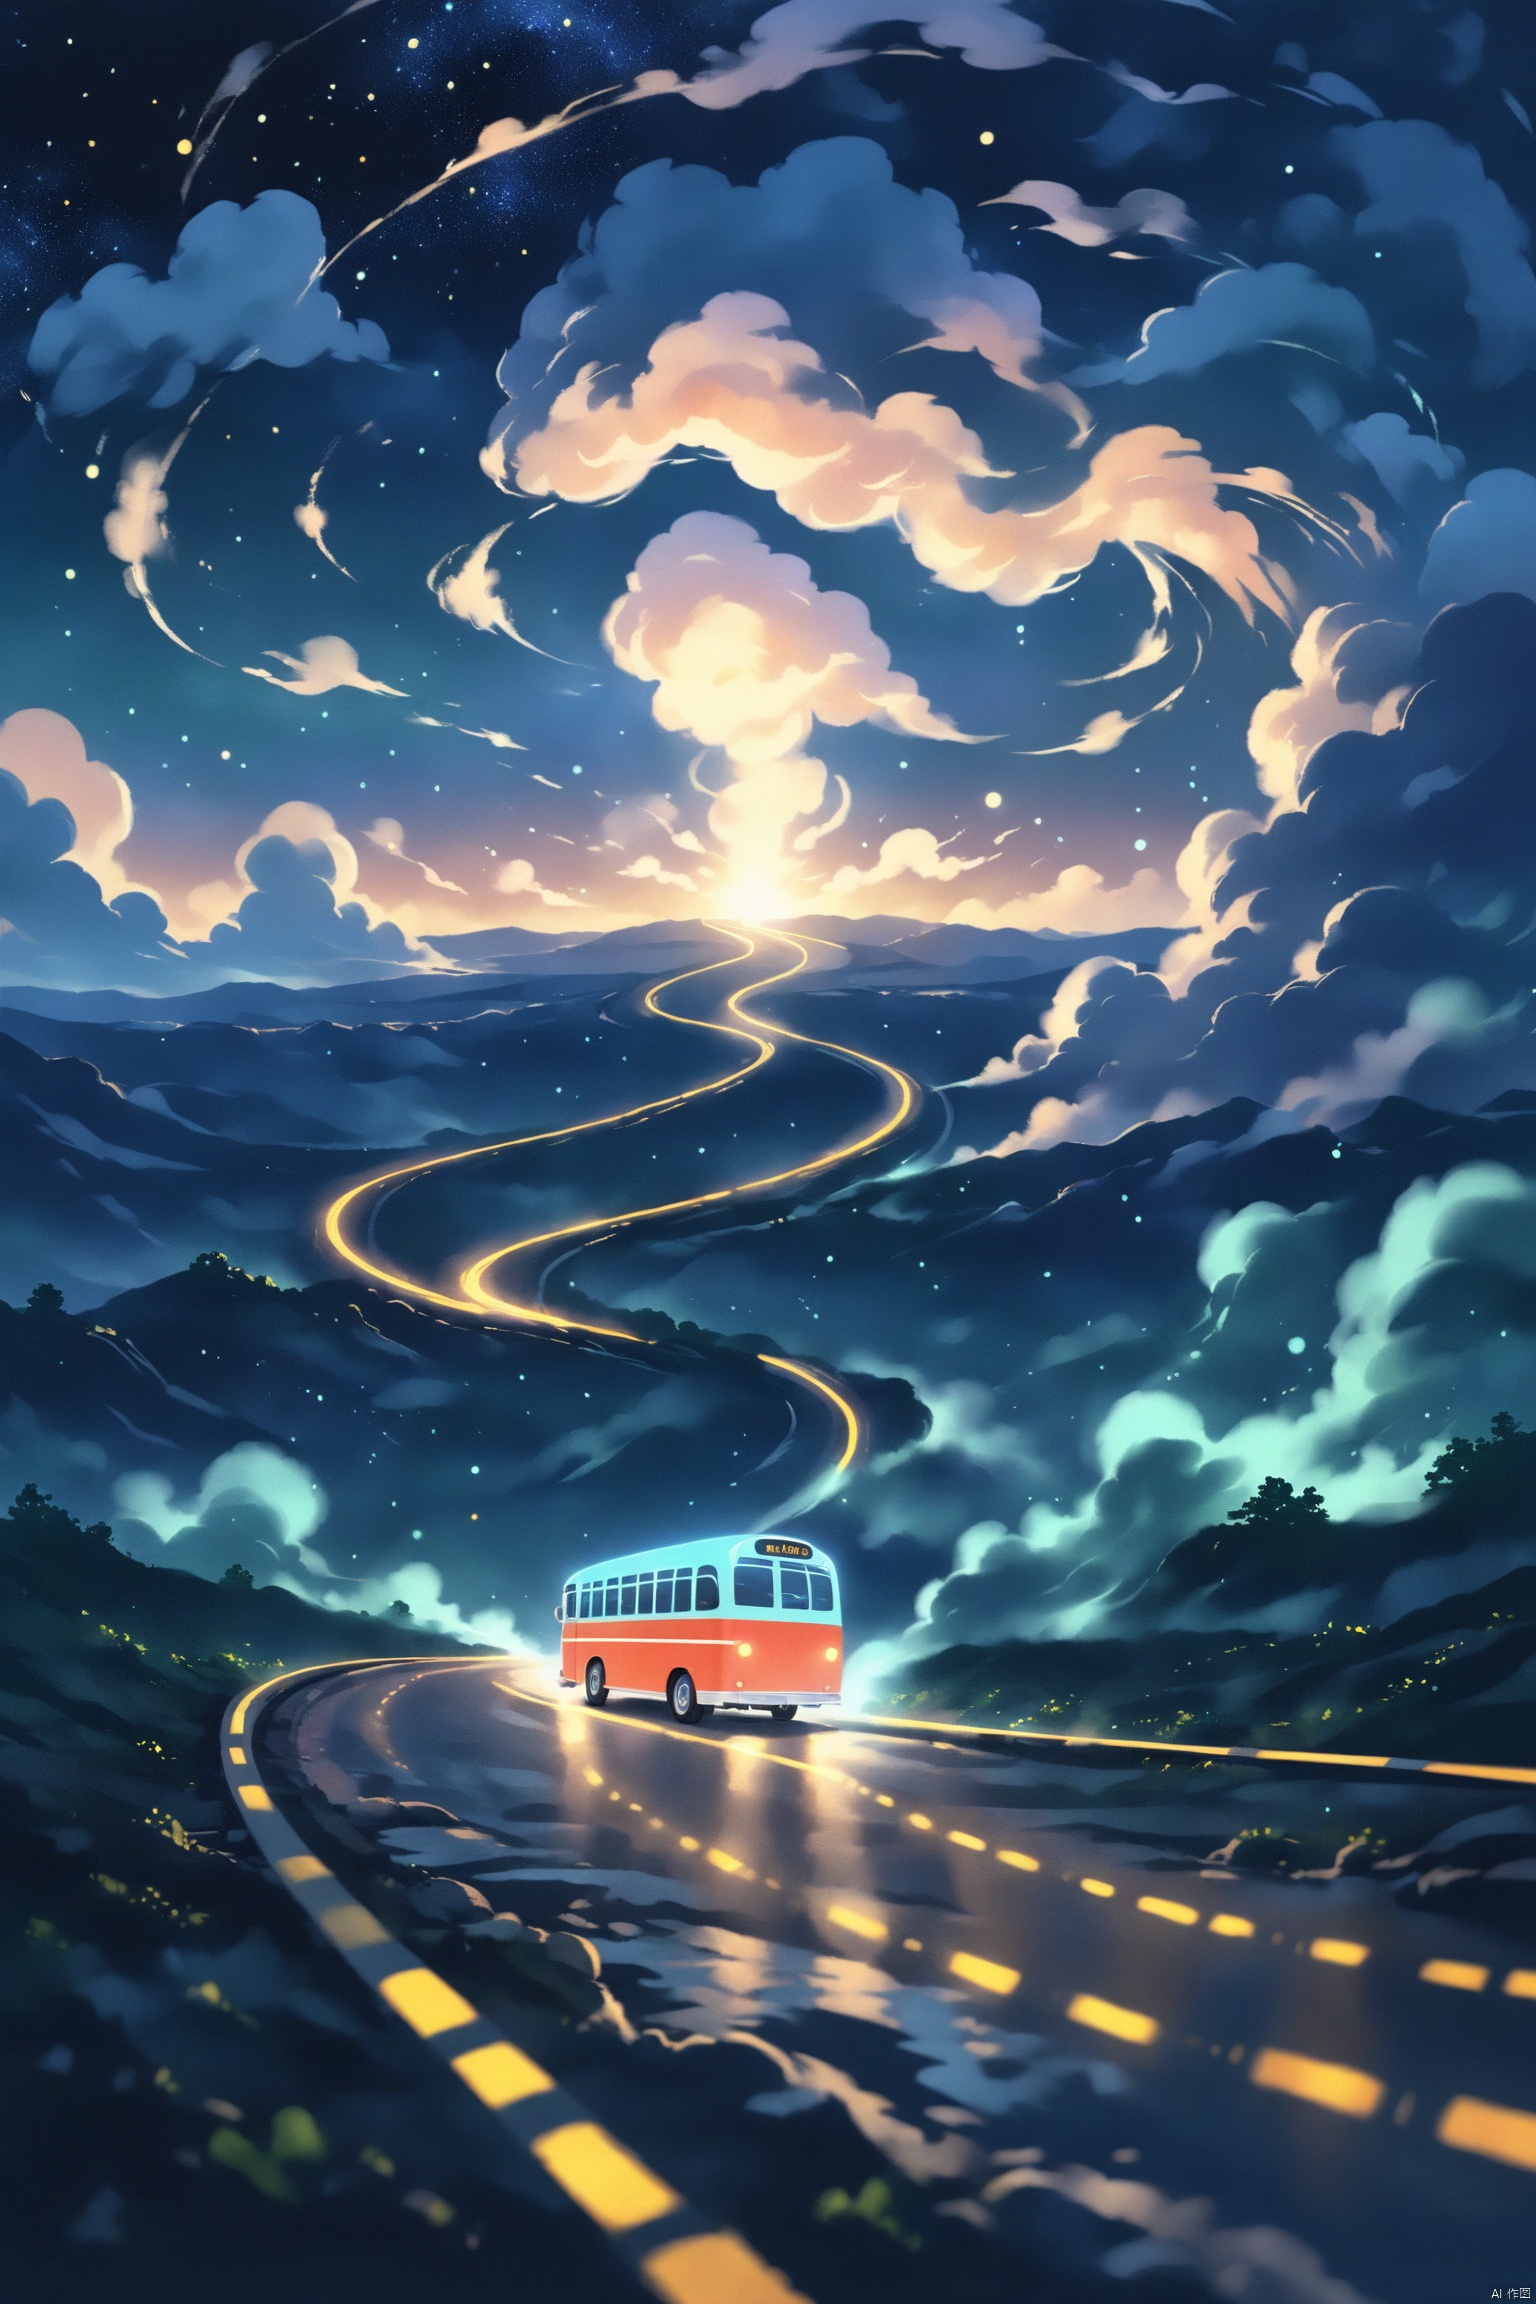 Surrealism Dream Style,glowing neon color,highly detailed,ultra-high resolutions,32K UHD,IMAX,best quality,masterpiece,at night,clouds,
vintage bus, driving on the highway, painting the gate with light, crossing time and space, clouds, smoke, mystery,